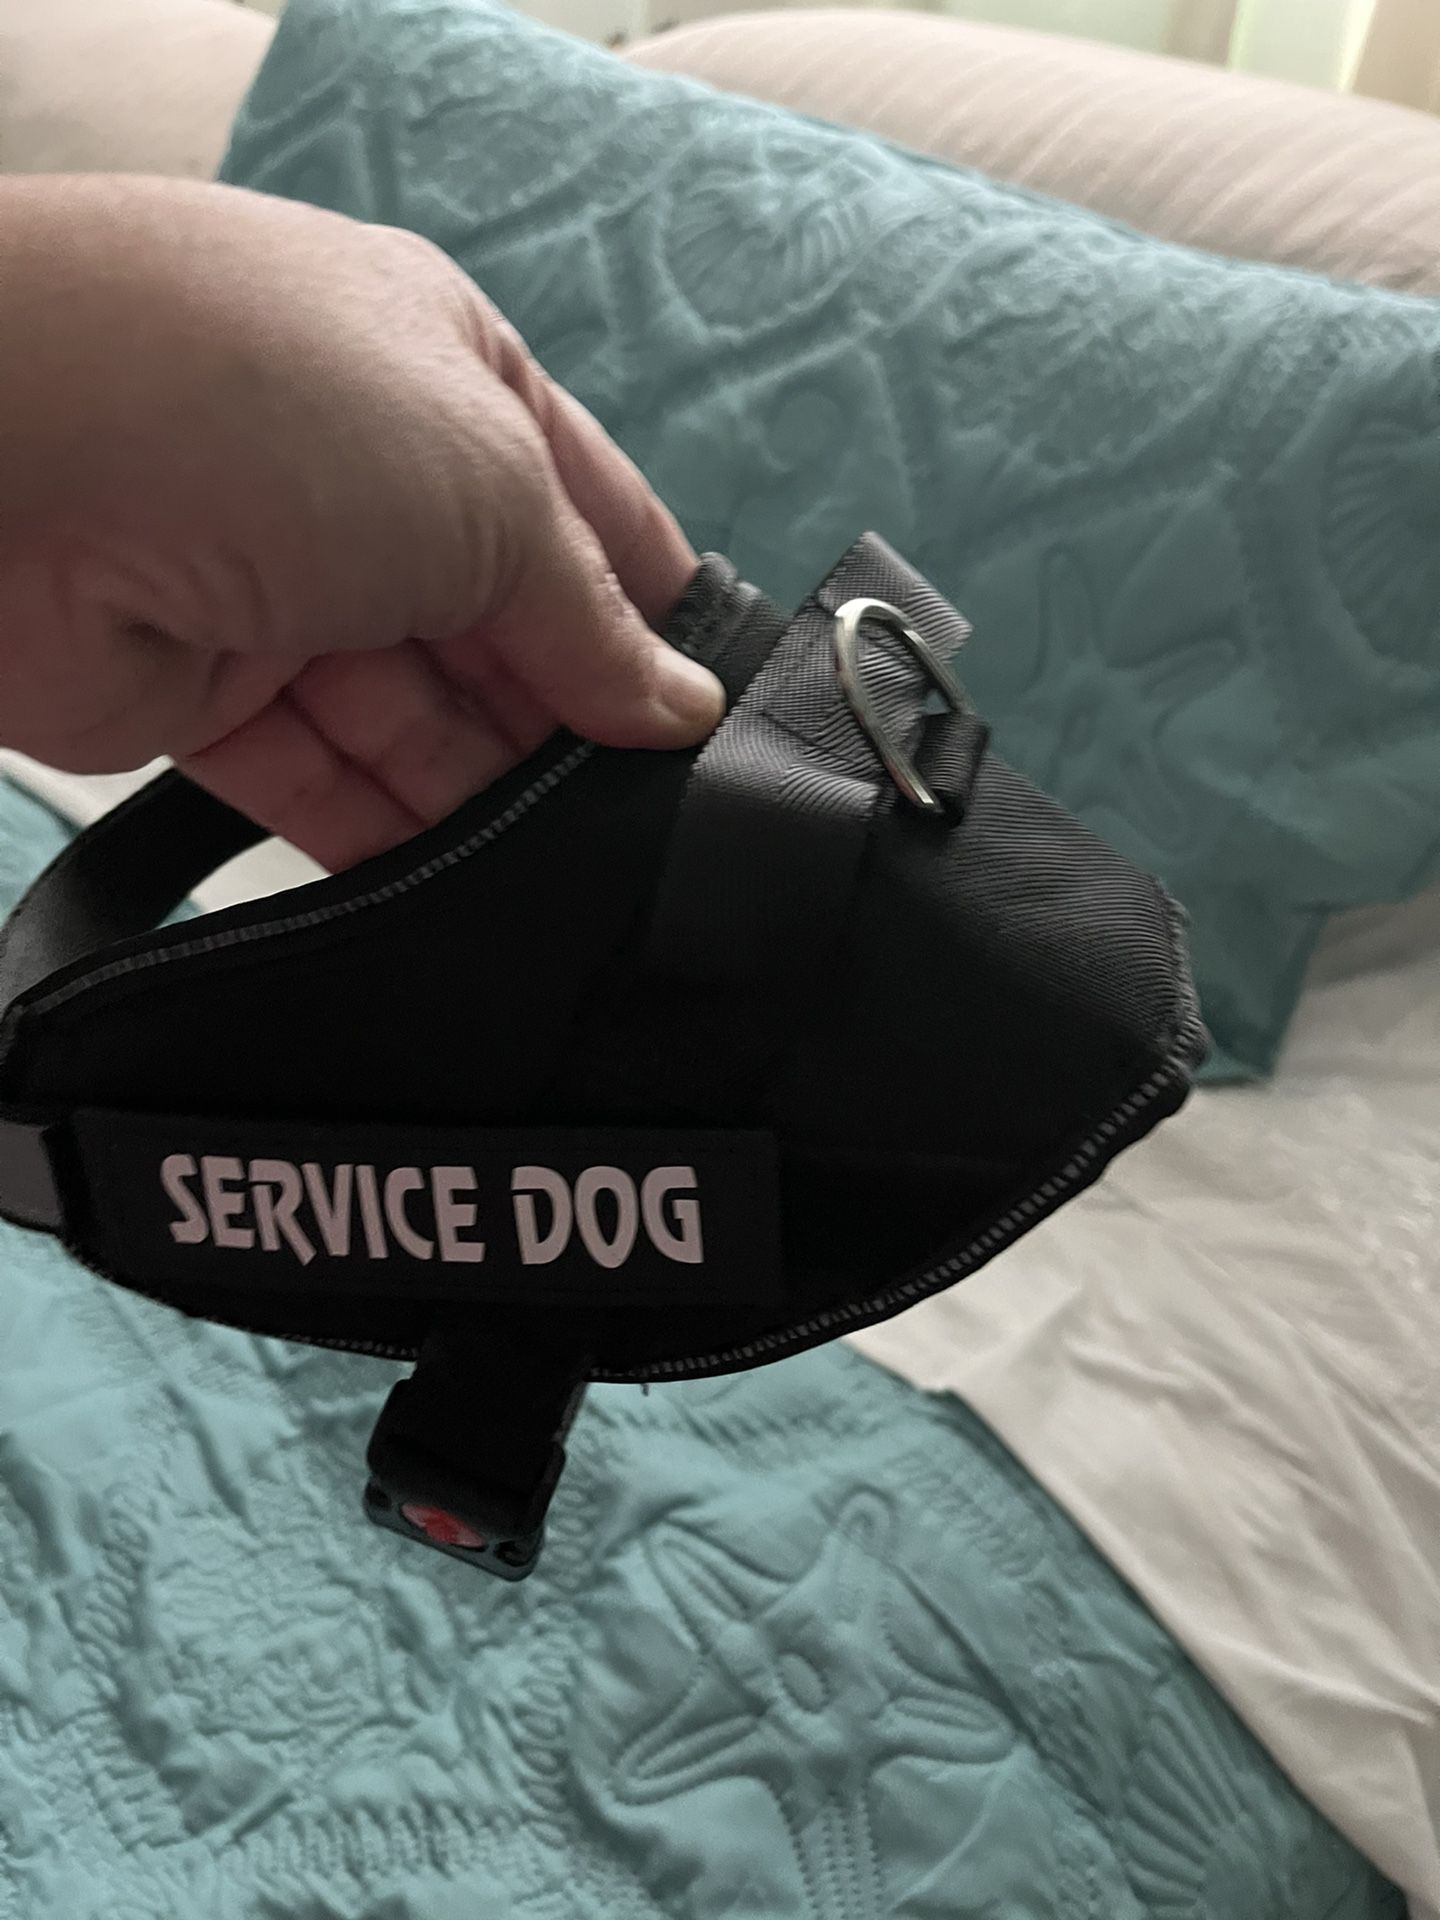 It’s a service dog harness size small weight for dog is up to 18 pounds